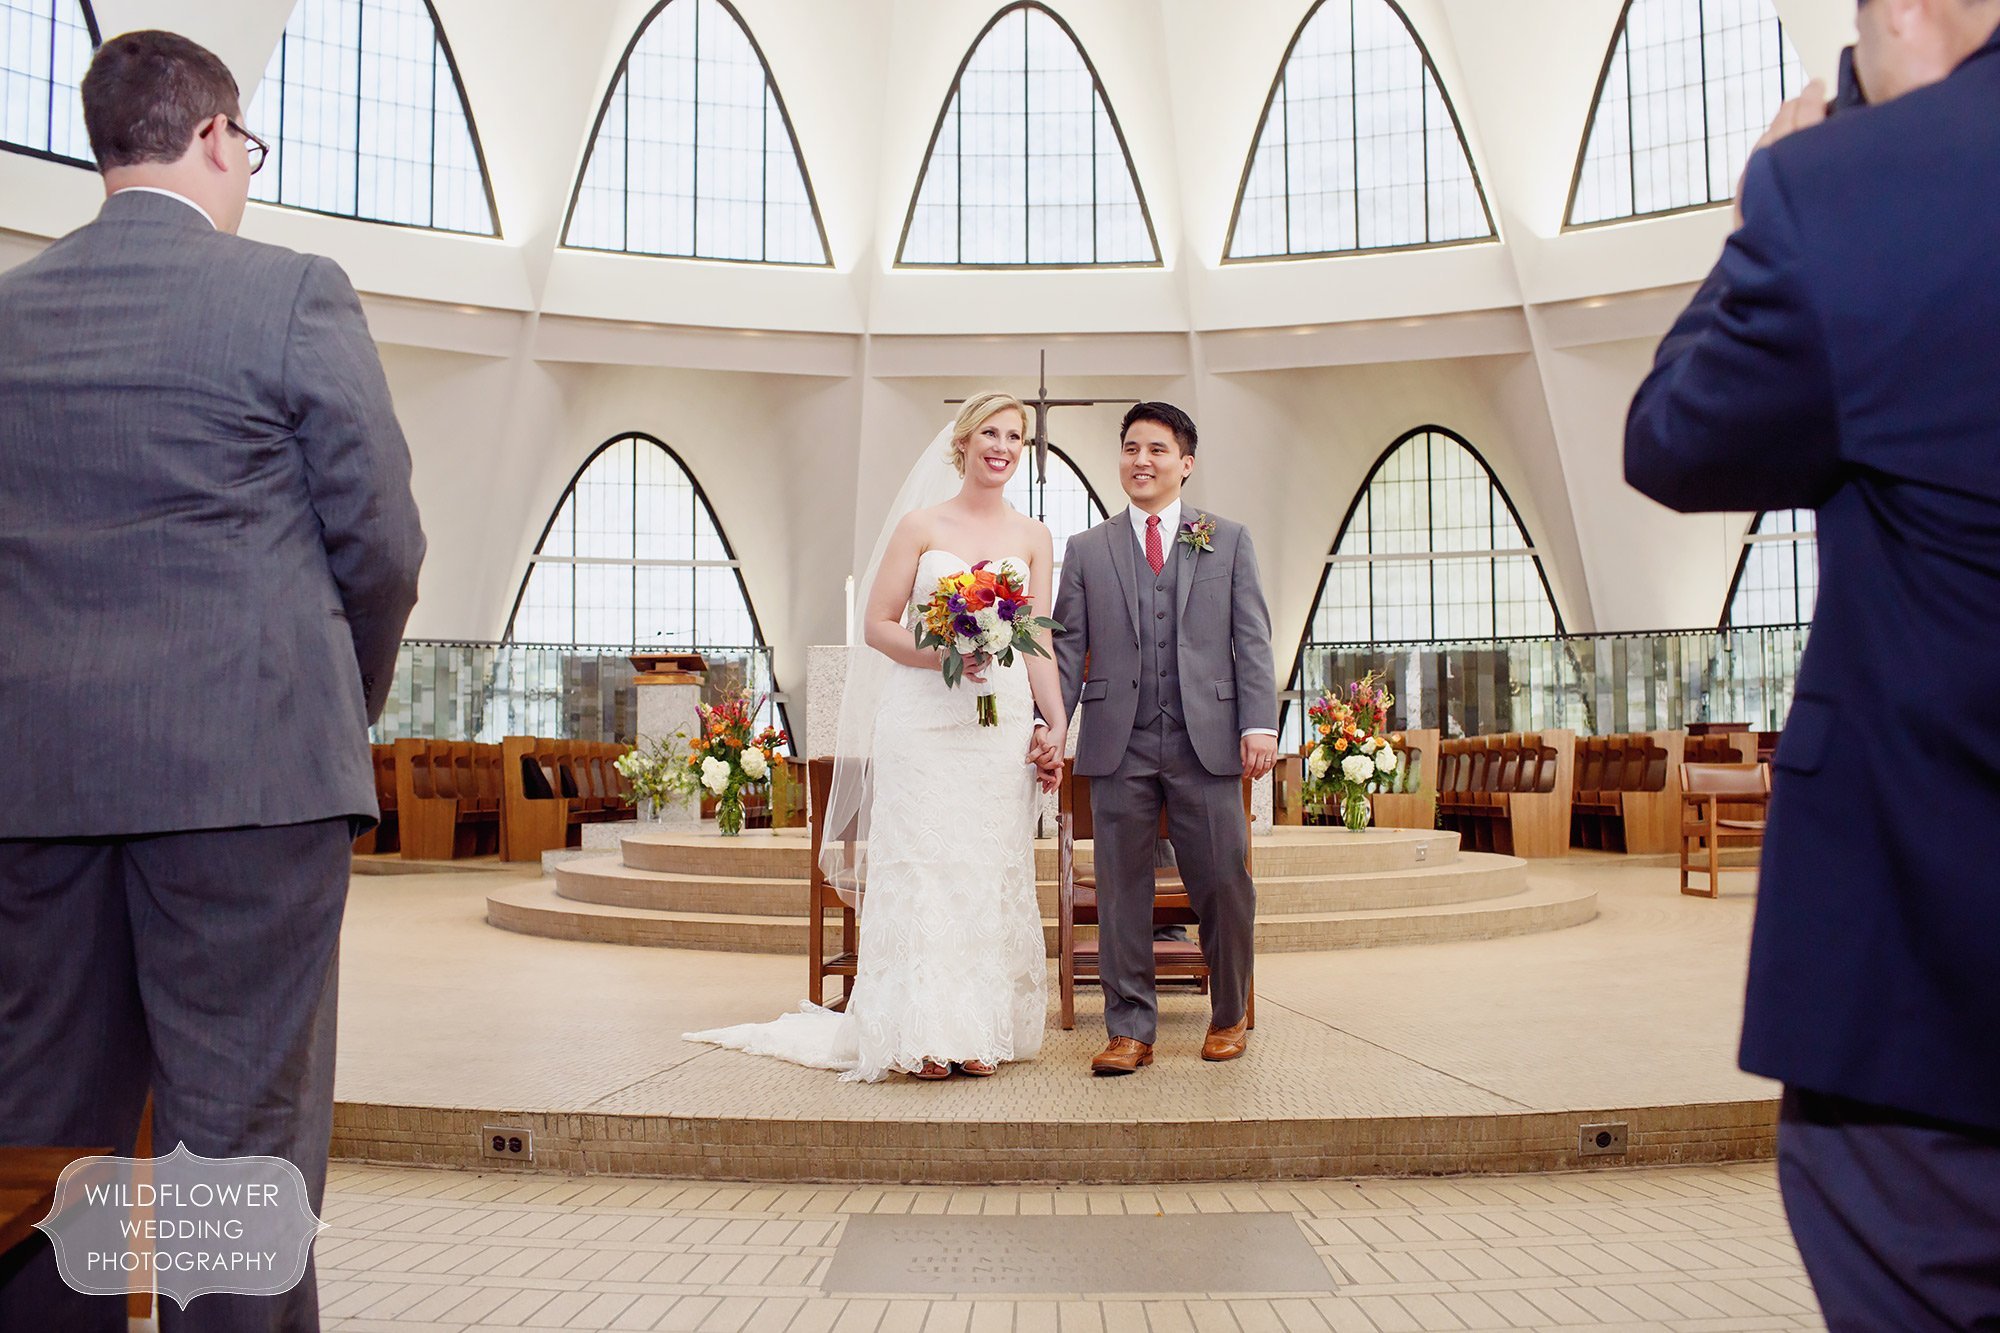 Bride and groom stand on the alter after their ceremony at St. Anslem's Church at the Priory in St. Louis.